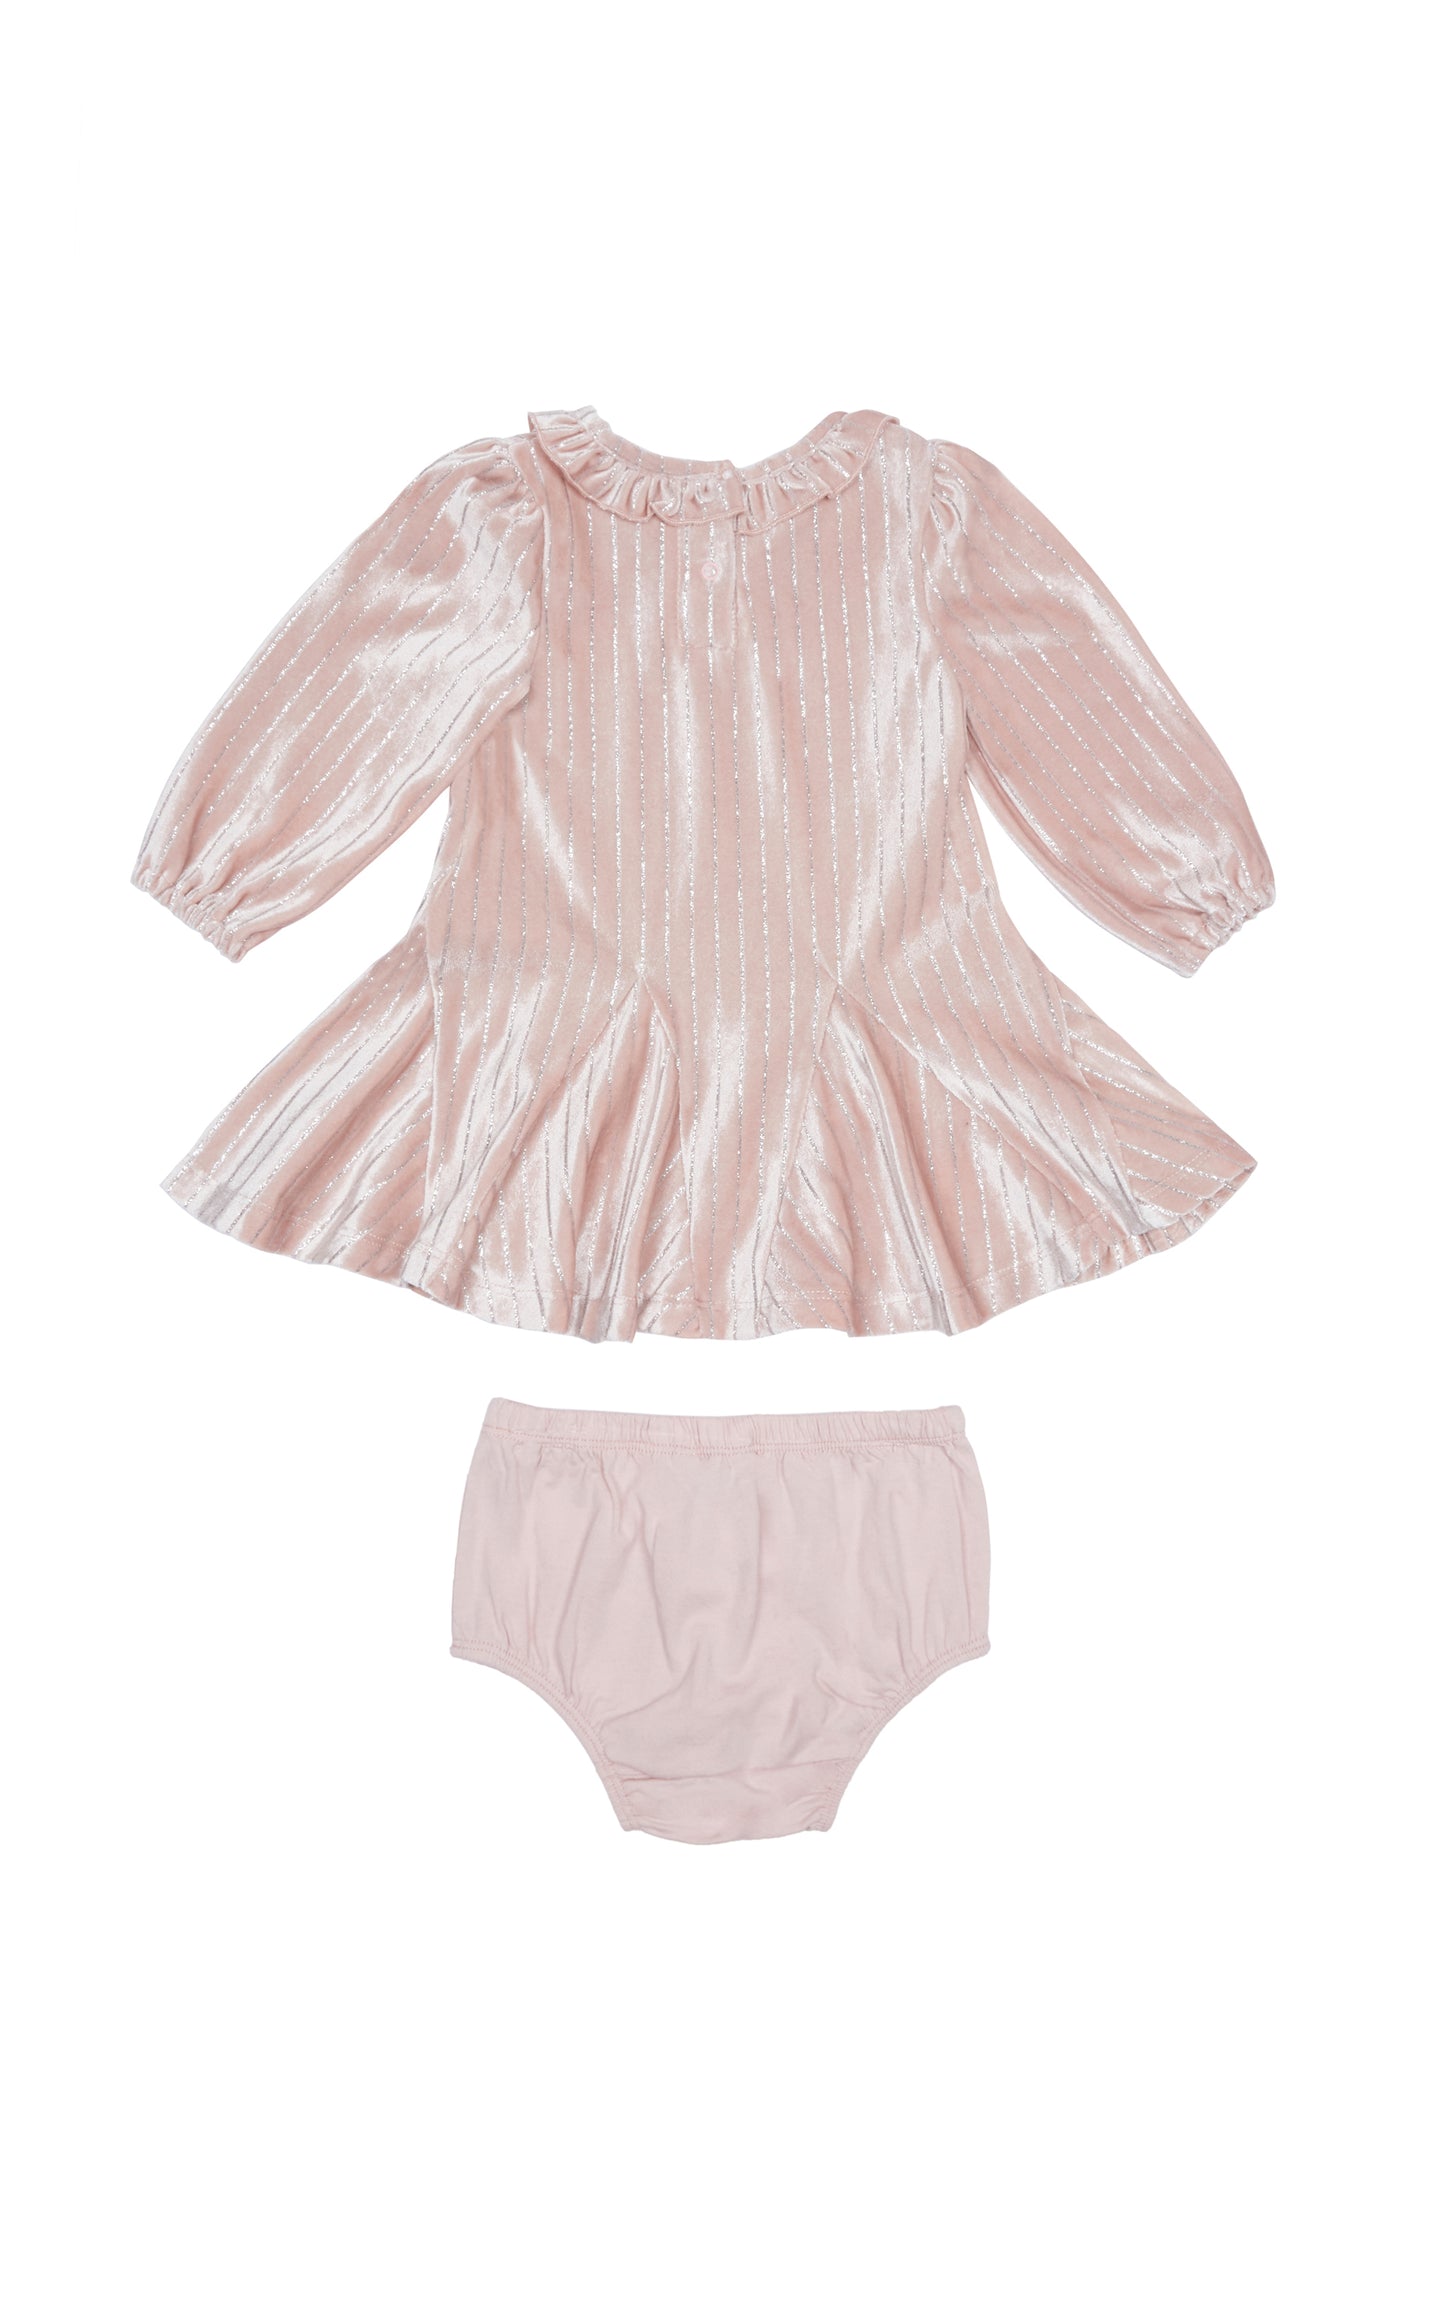 Back view of pink long-sleeve swing dress with metallic stripes and solid-color panty cover.